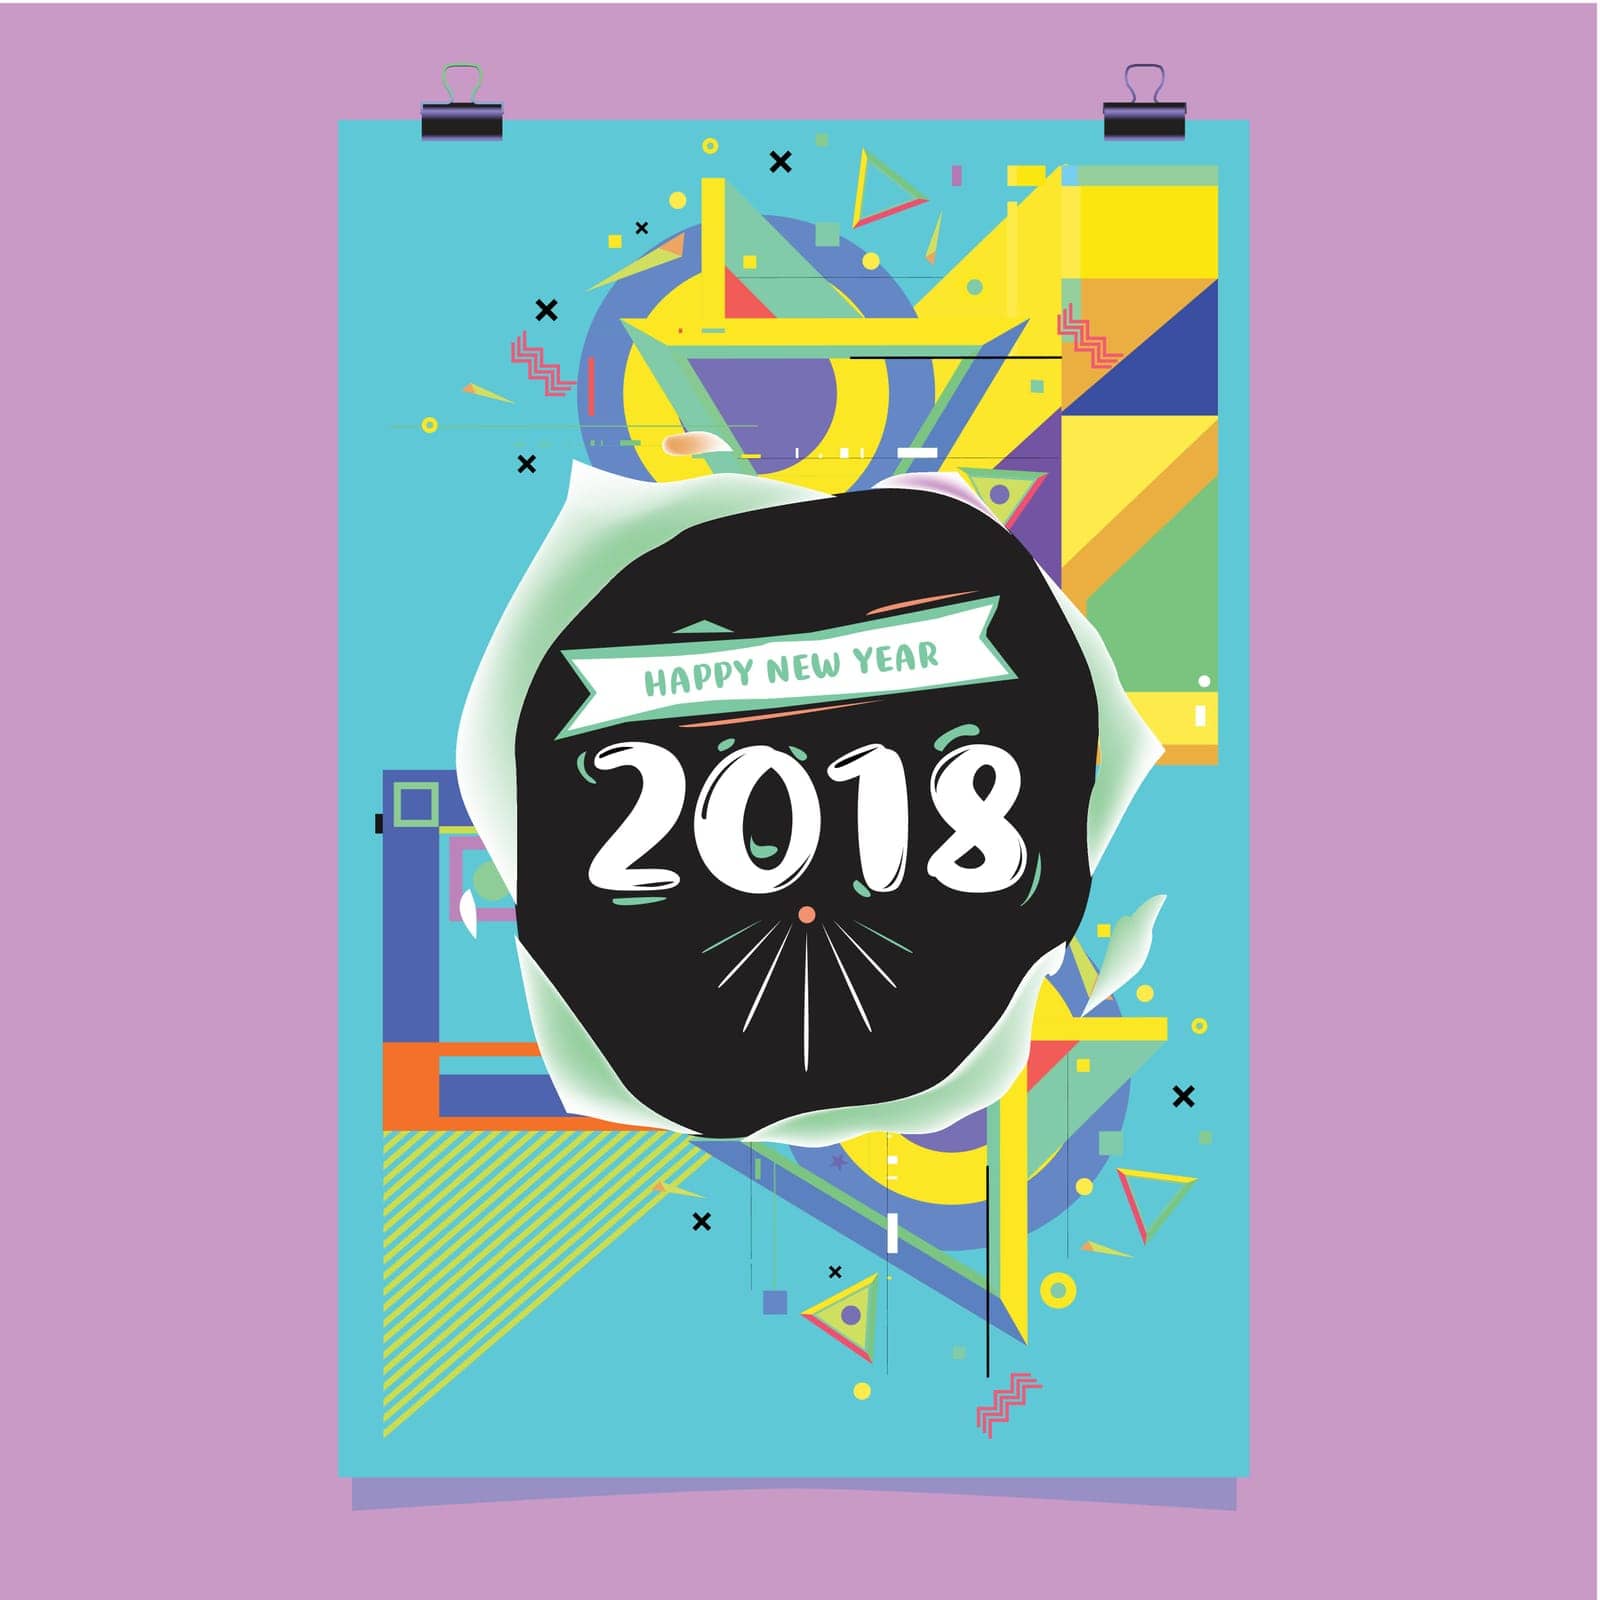 date,symbol,typography,year,happy,greeting,type,cover,annual,day,element,new,celebrate,invitation,cheerful,decorative,christmas,square,celebration,background,geometric,style,poster,party,card,colorful,template,winter,holiday,ornament,happiness,eve,design,vector,event,xmas,calendar,memphis,set,display,festive,retro,banner,2021,abstract,layout,multicolored,2018,illustration by ogqcorp